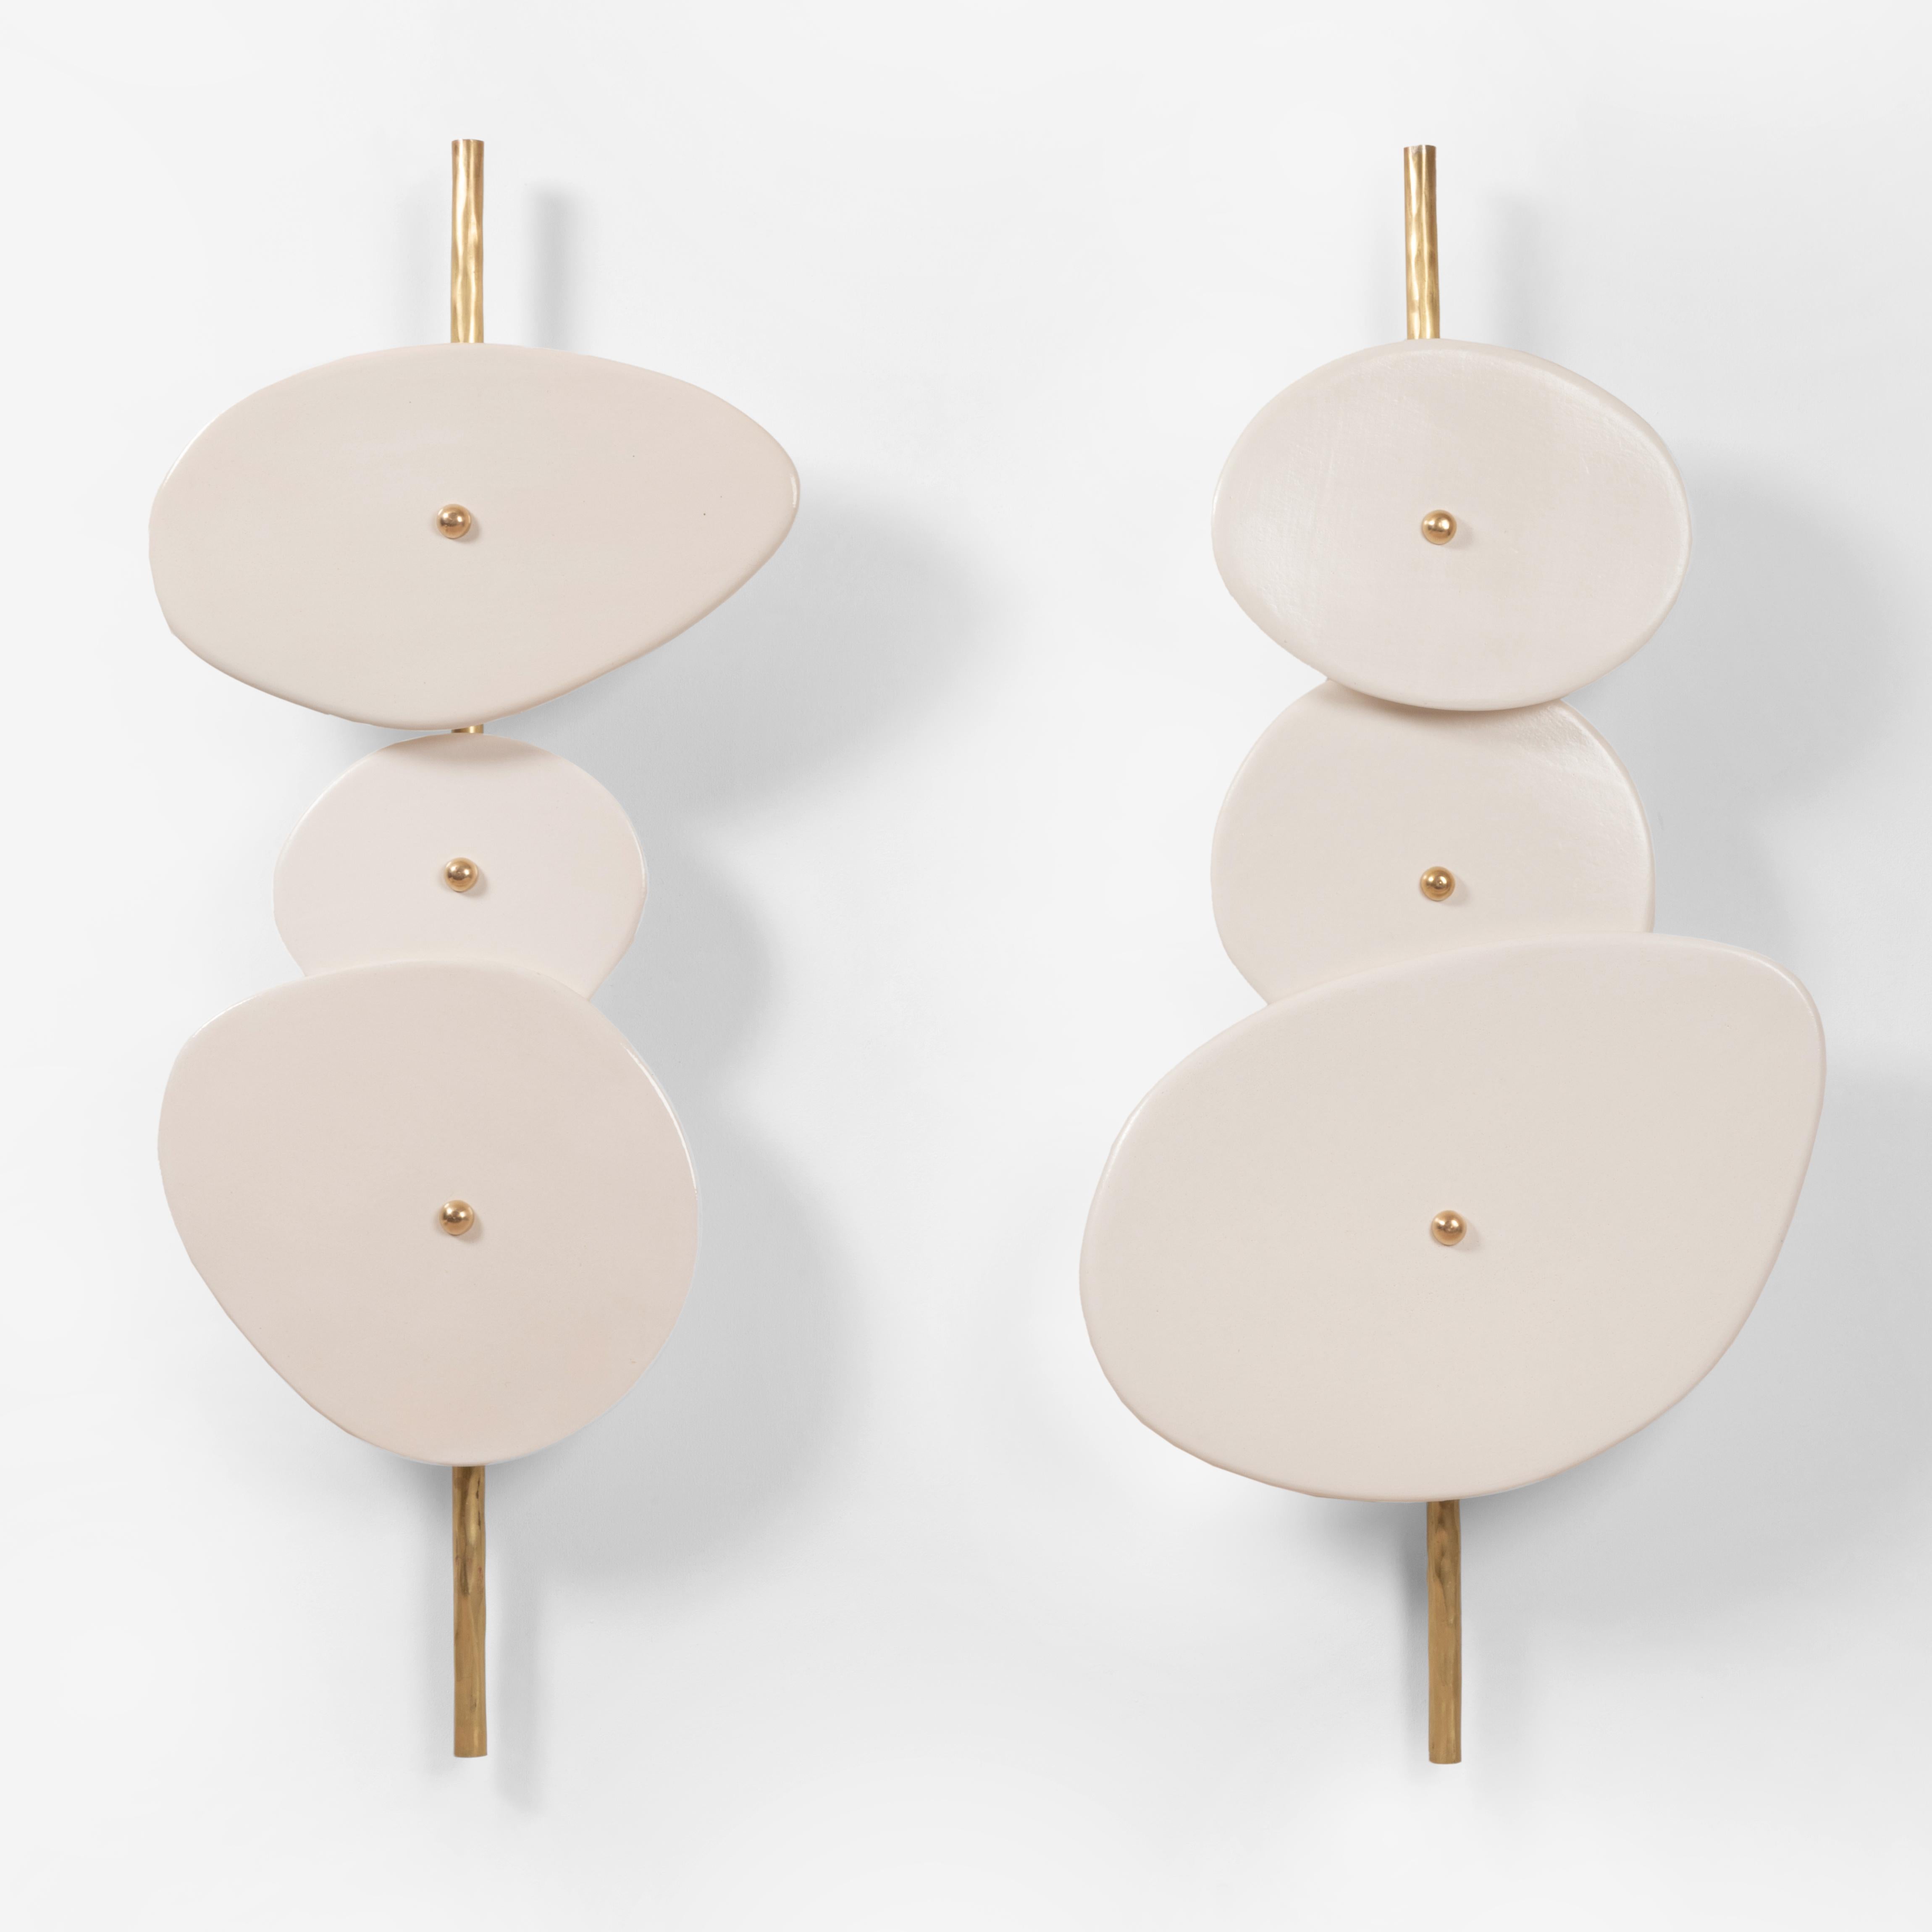 Set of 2 Achille Wall Sconces by Elsa Foulon.
Unique Pieces
Dimensions: H 75 cm
Materials: ceramic, brass

All our lamps can be wired according to each country. If sold to the USA it will be wired for the USA for instance.

Elsa Foulon,